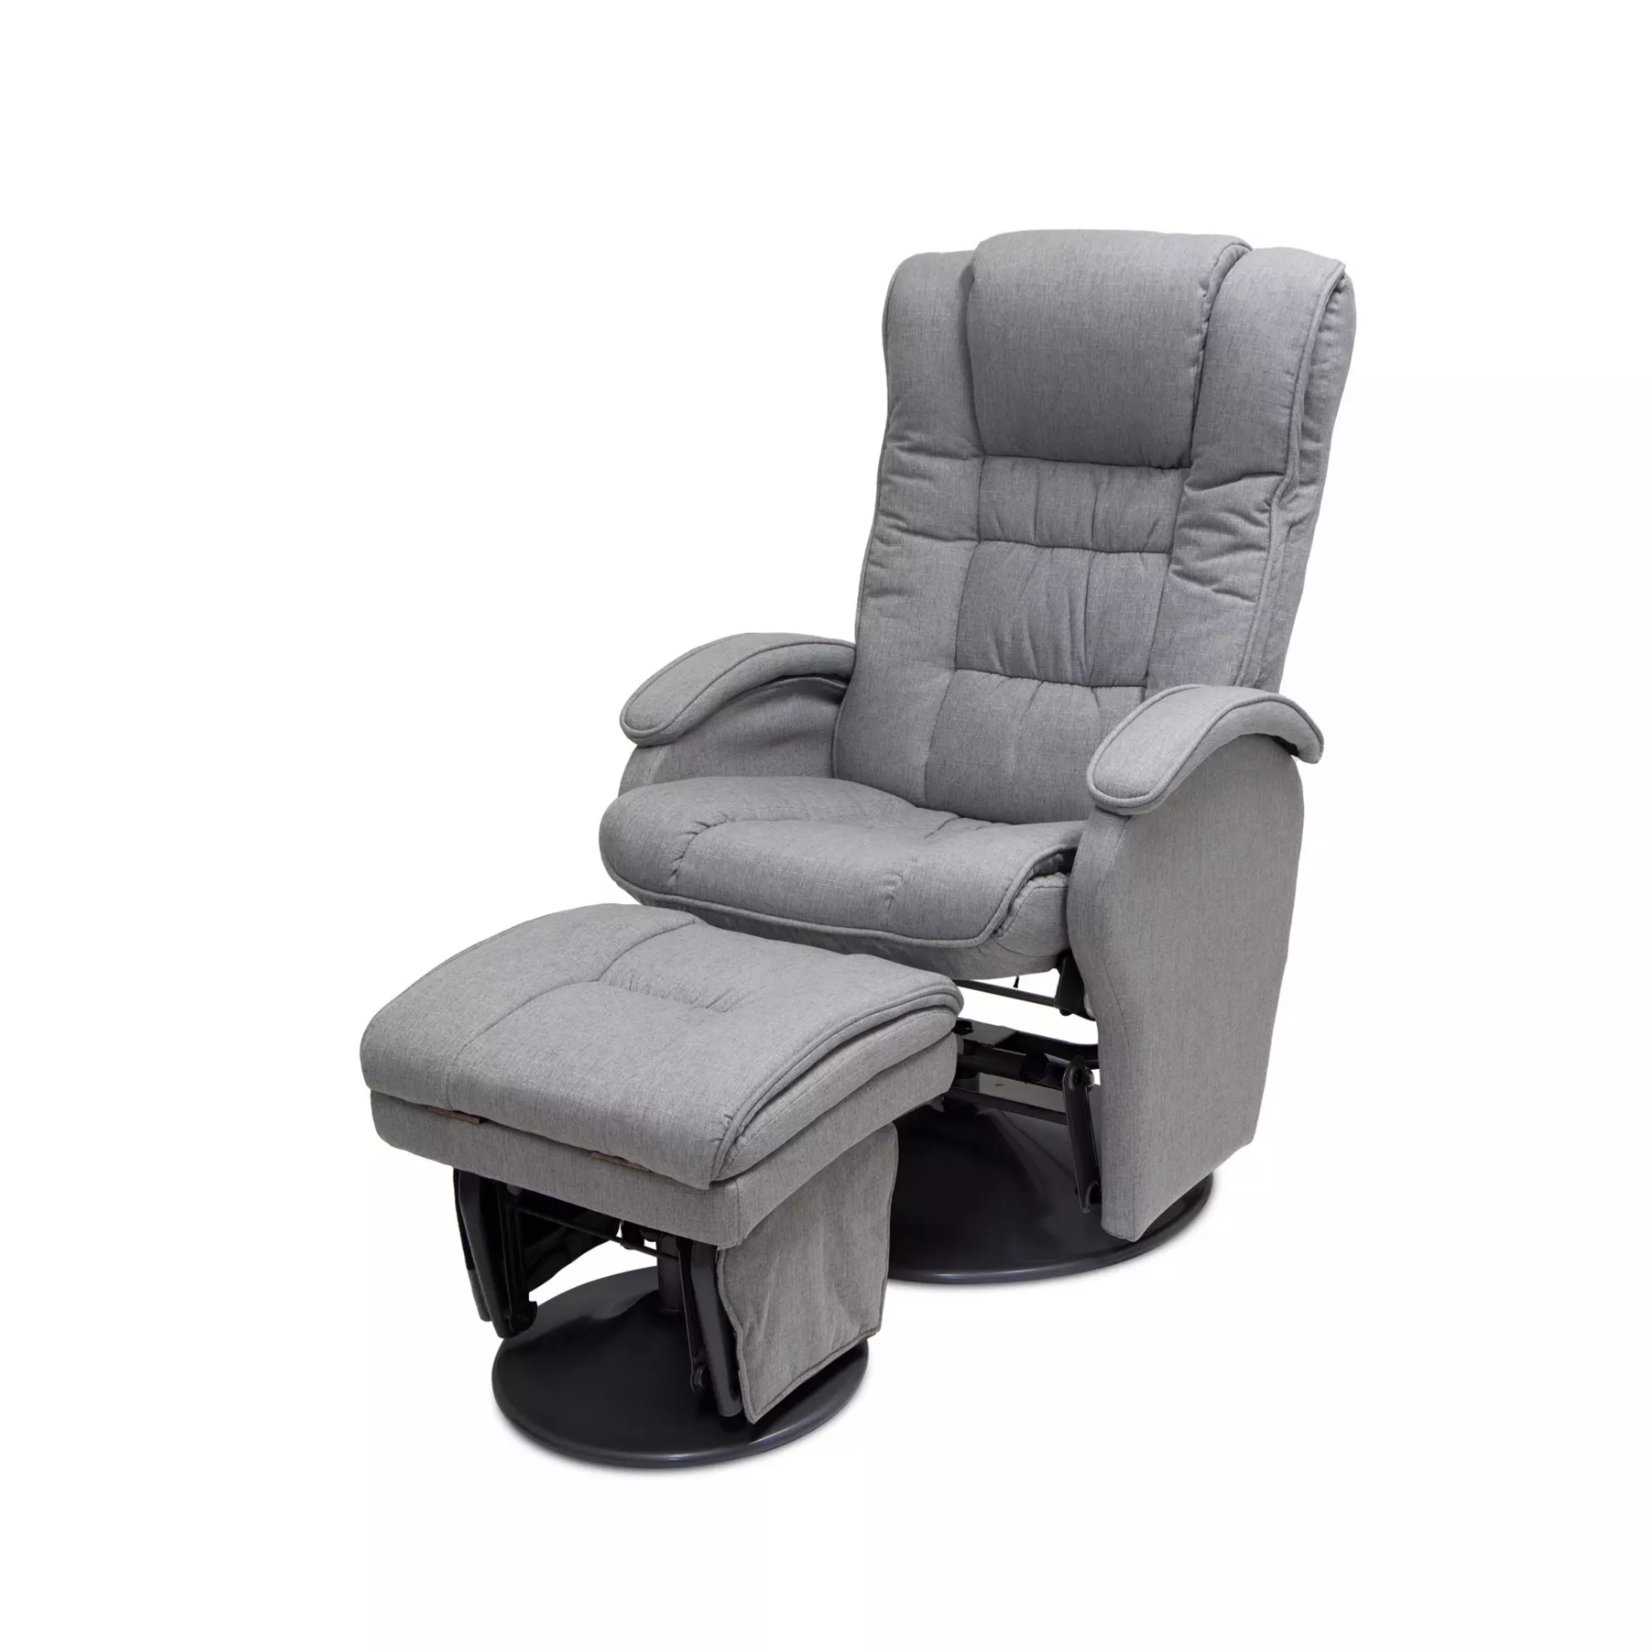 Valco Baby Eurobell Glider And Ottoman-Misty Grey